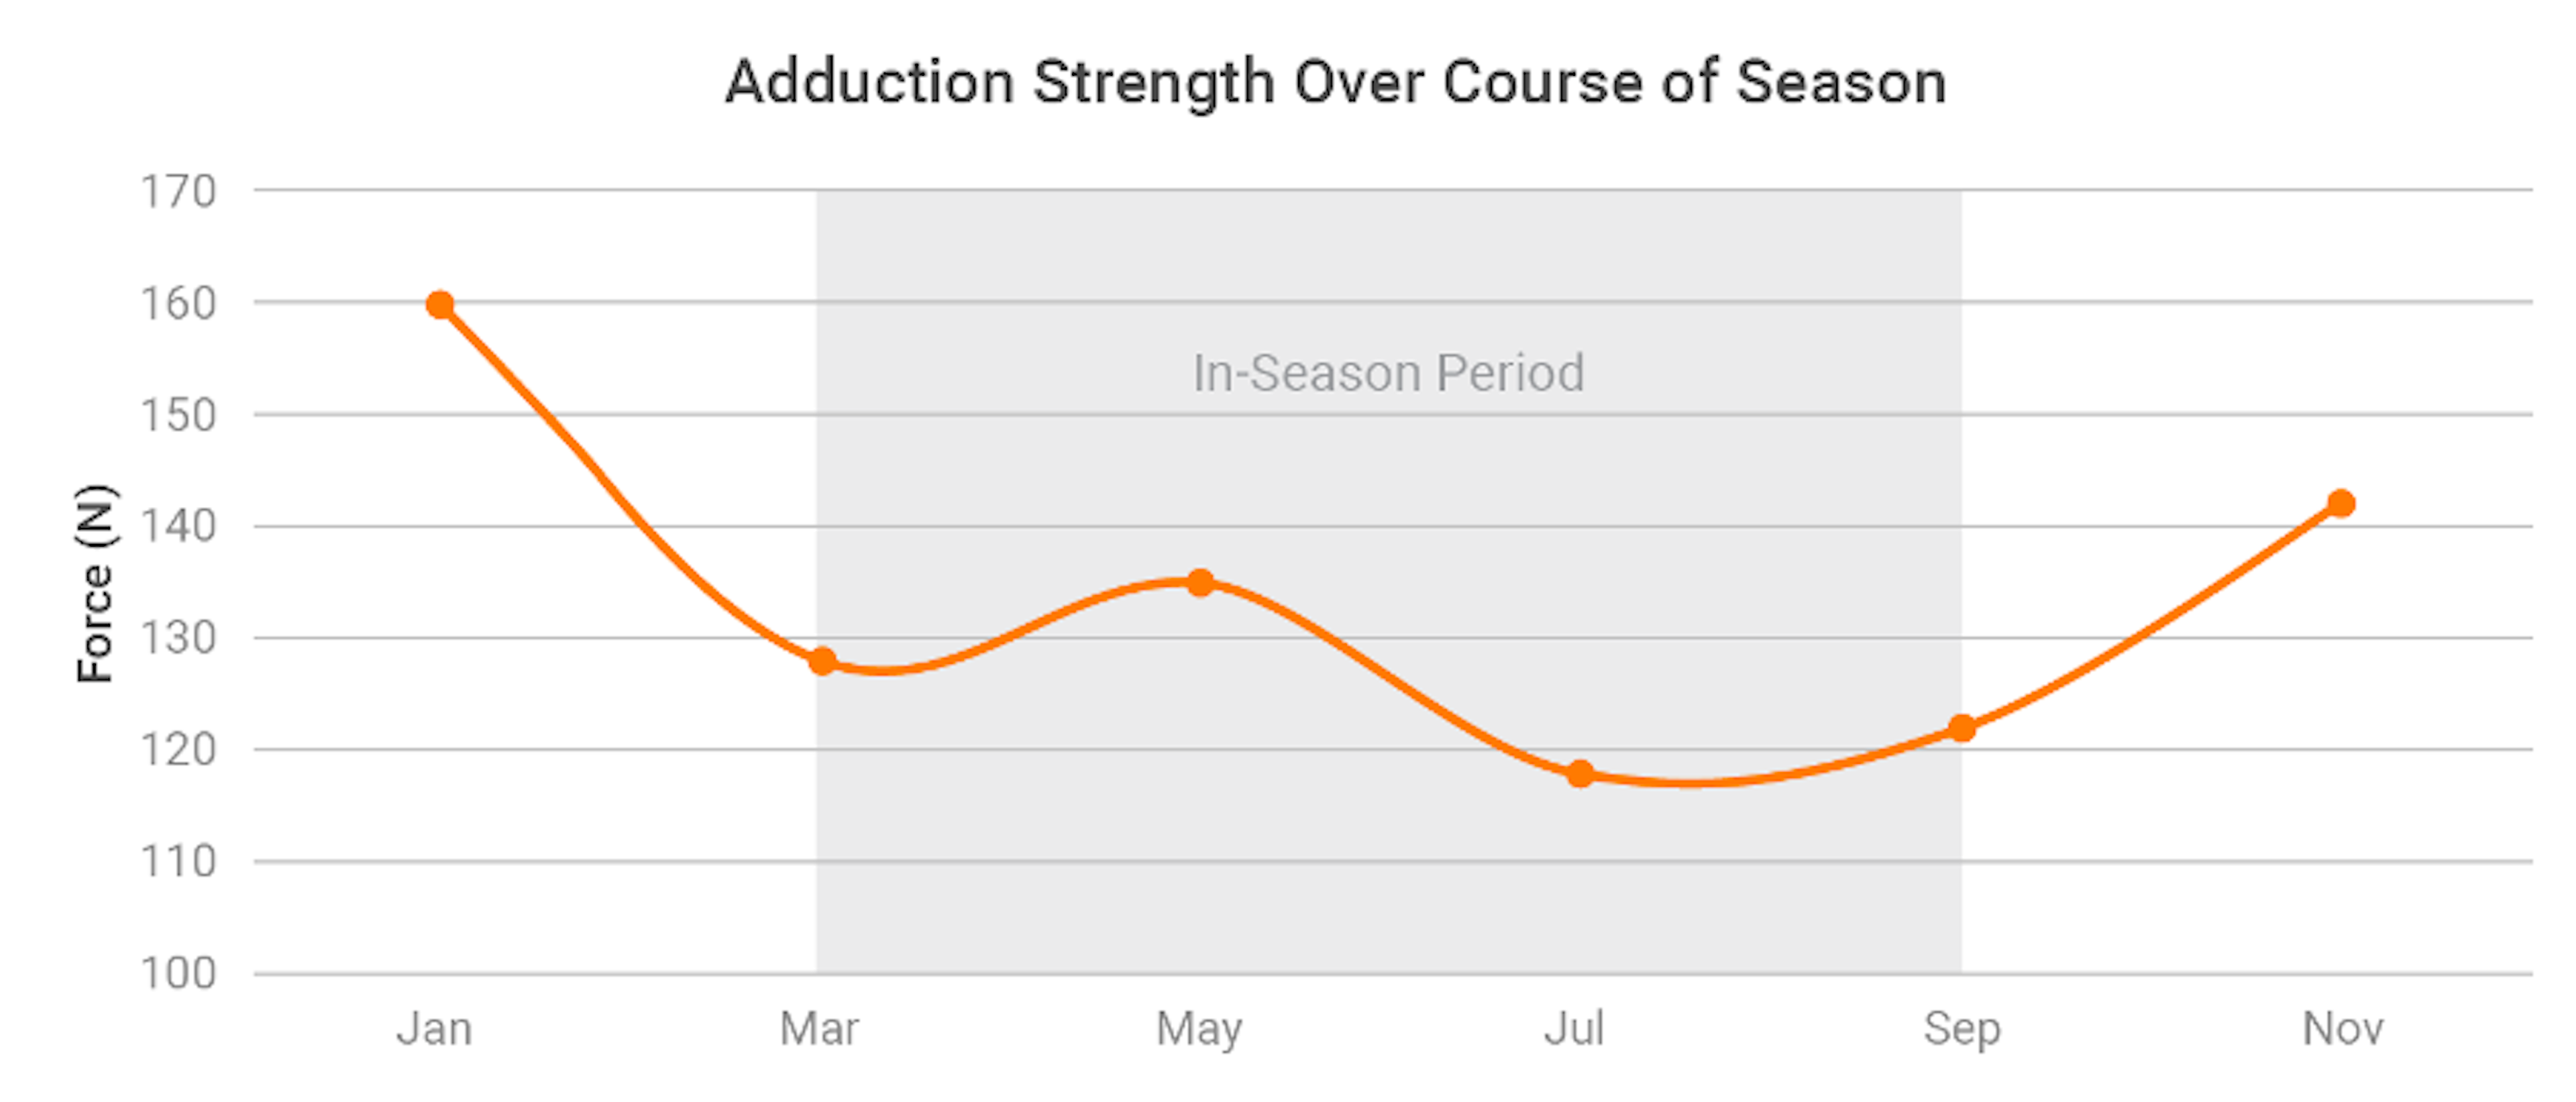 Adduction strength showed a clear reduction over the course of the season and appeared to begin recovering shortly after the season finished.